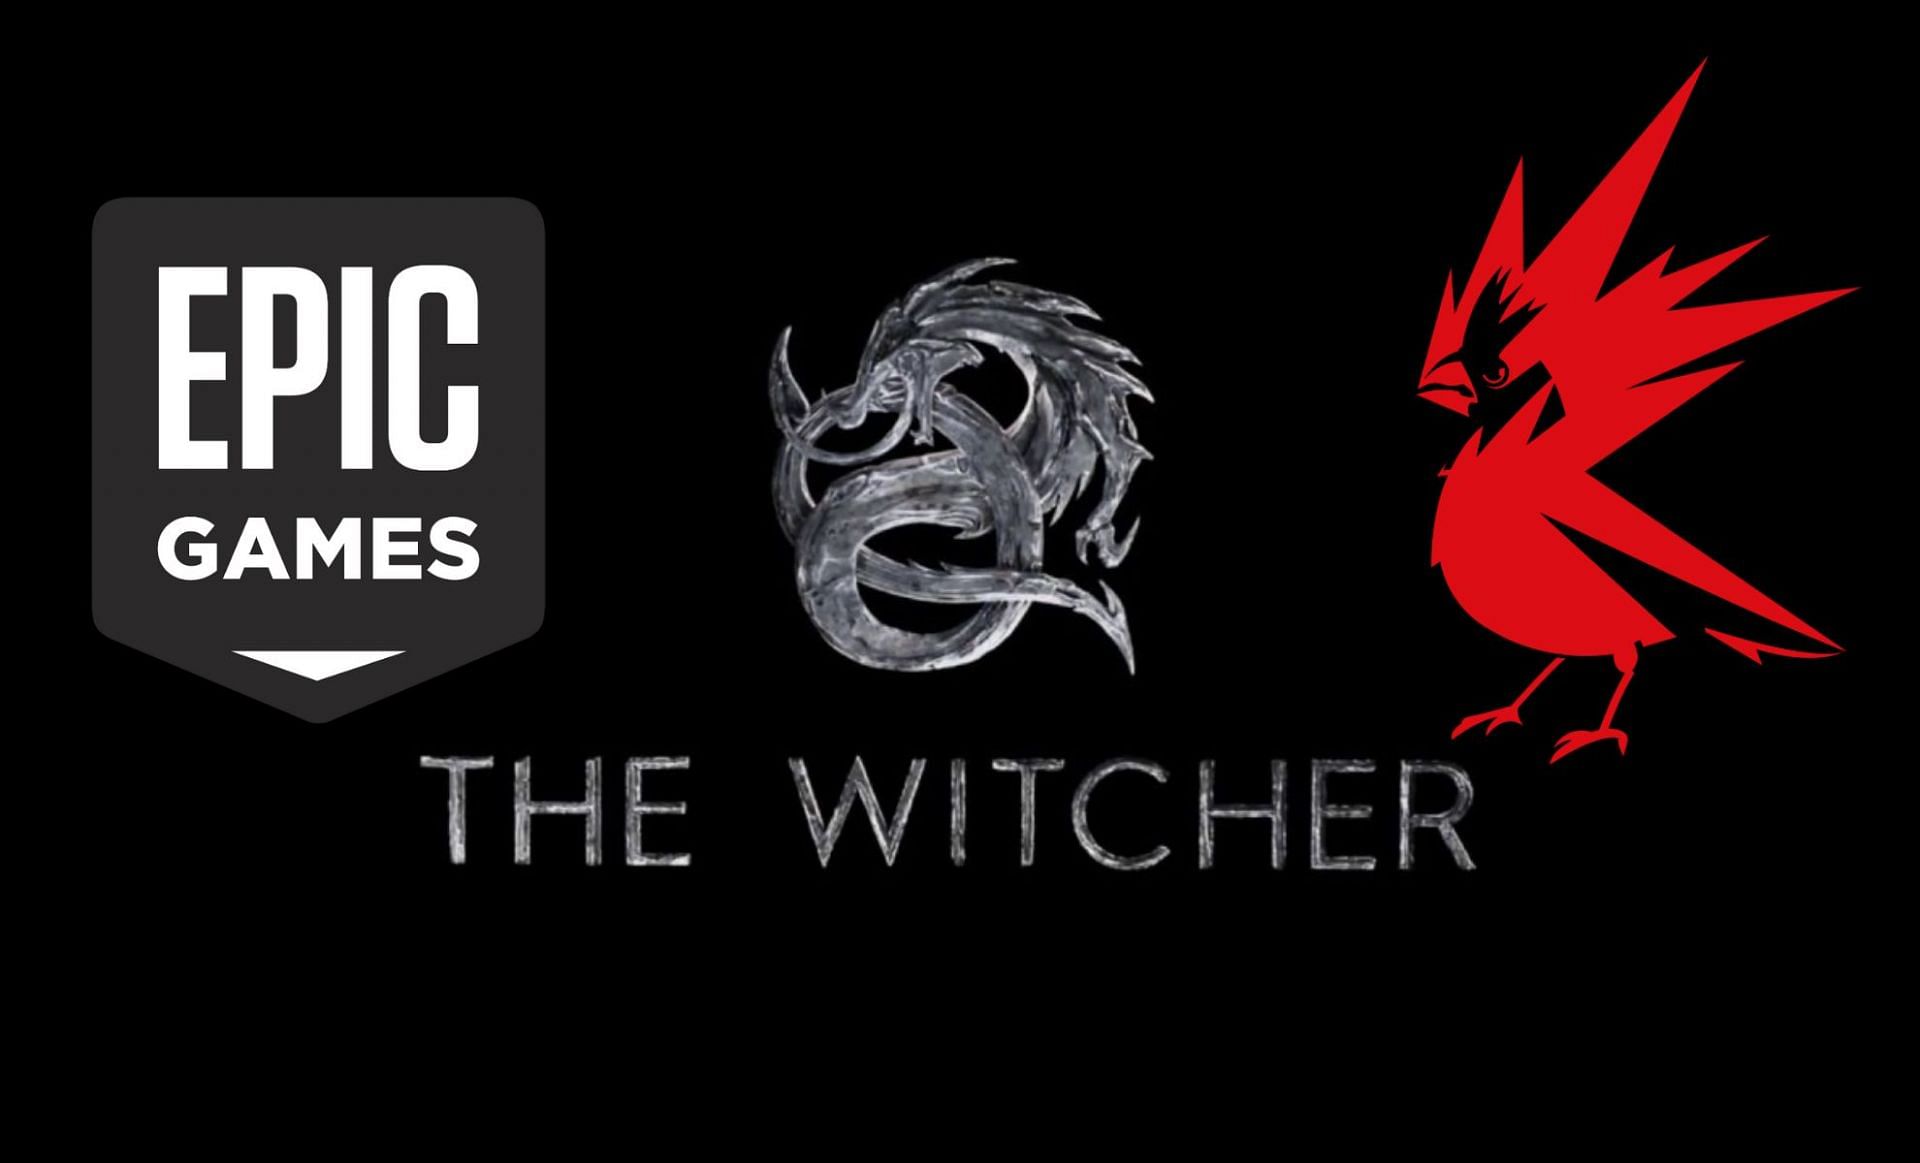 The two brands will be partnering, mainly for The Witcher (Images via Epic Games, CD Projekt Red)